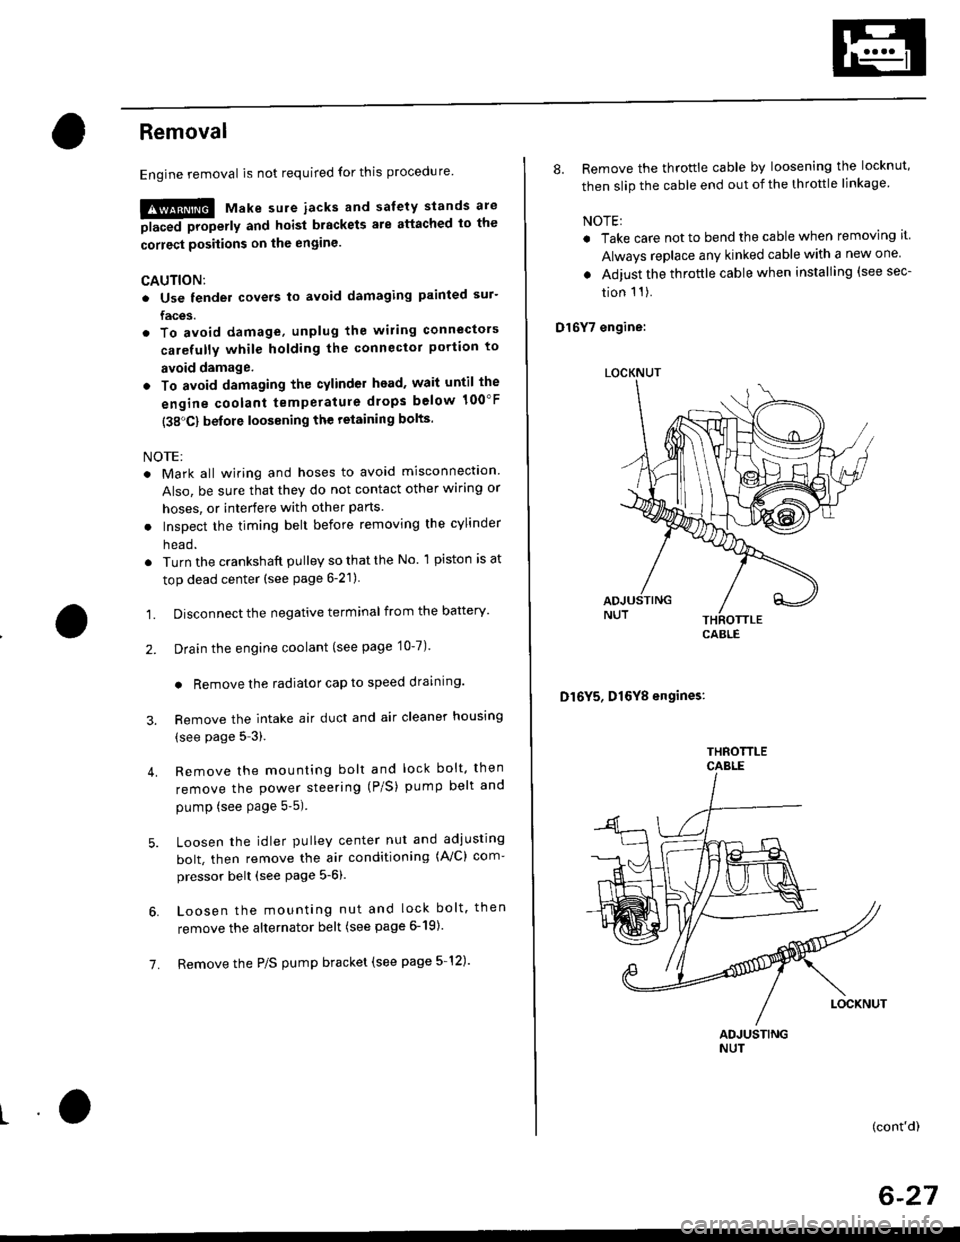 HONDA CIVIC 1999 6.G Workshop Manual Removal
Engine removal is not required for this procedure
!!!s@ Make sure iacks and salety stands are
f ta"eata"ea propetty and hoist brackets are attached to the
correct positions on the engine.
CAUT